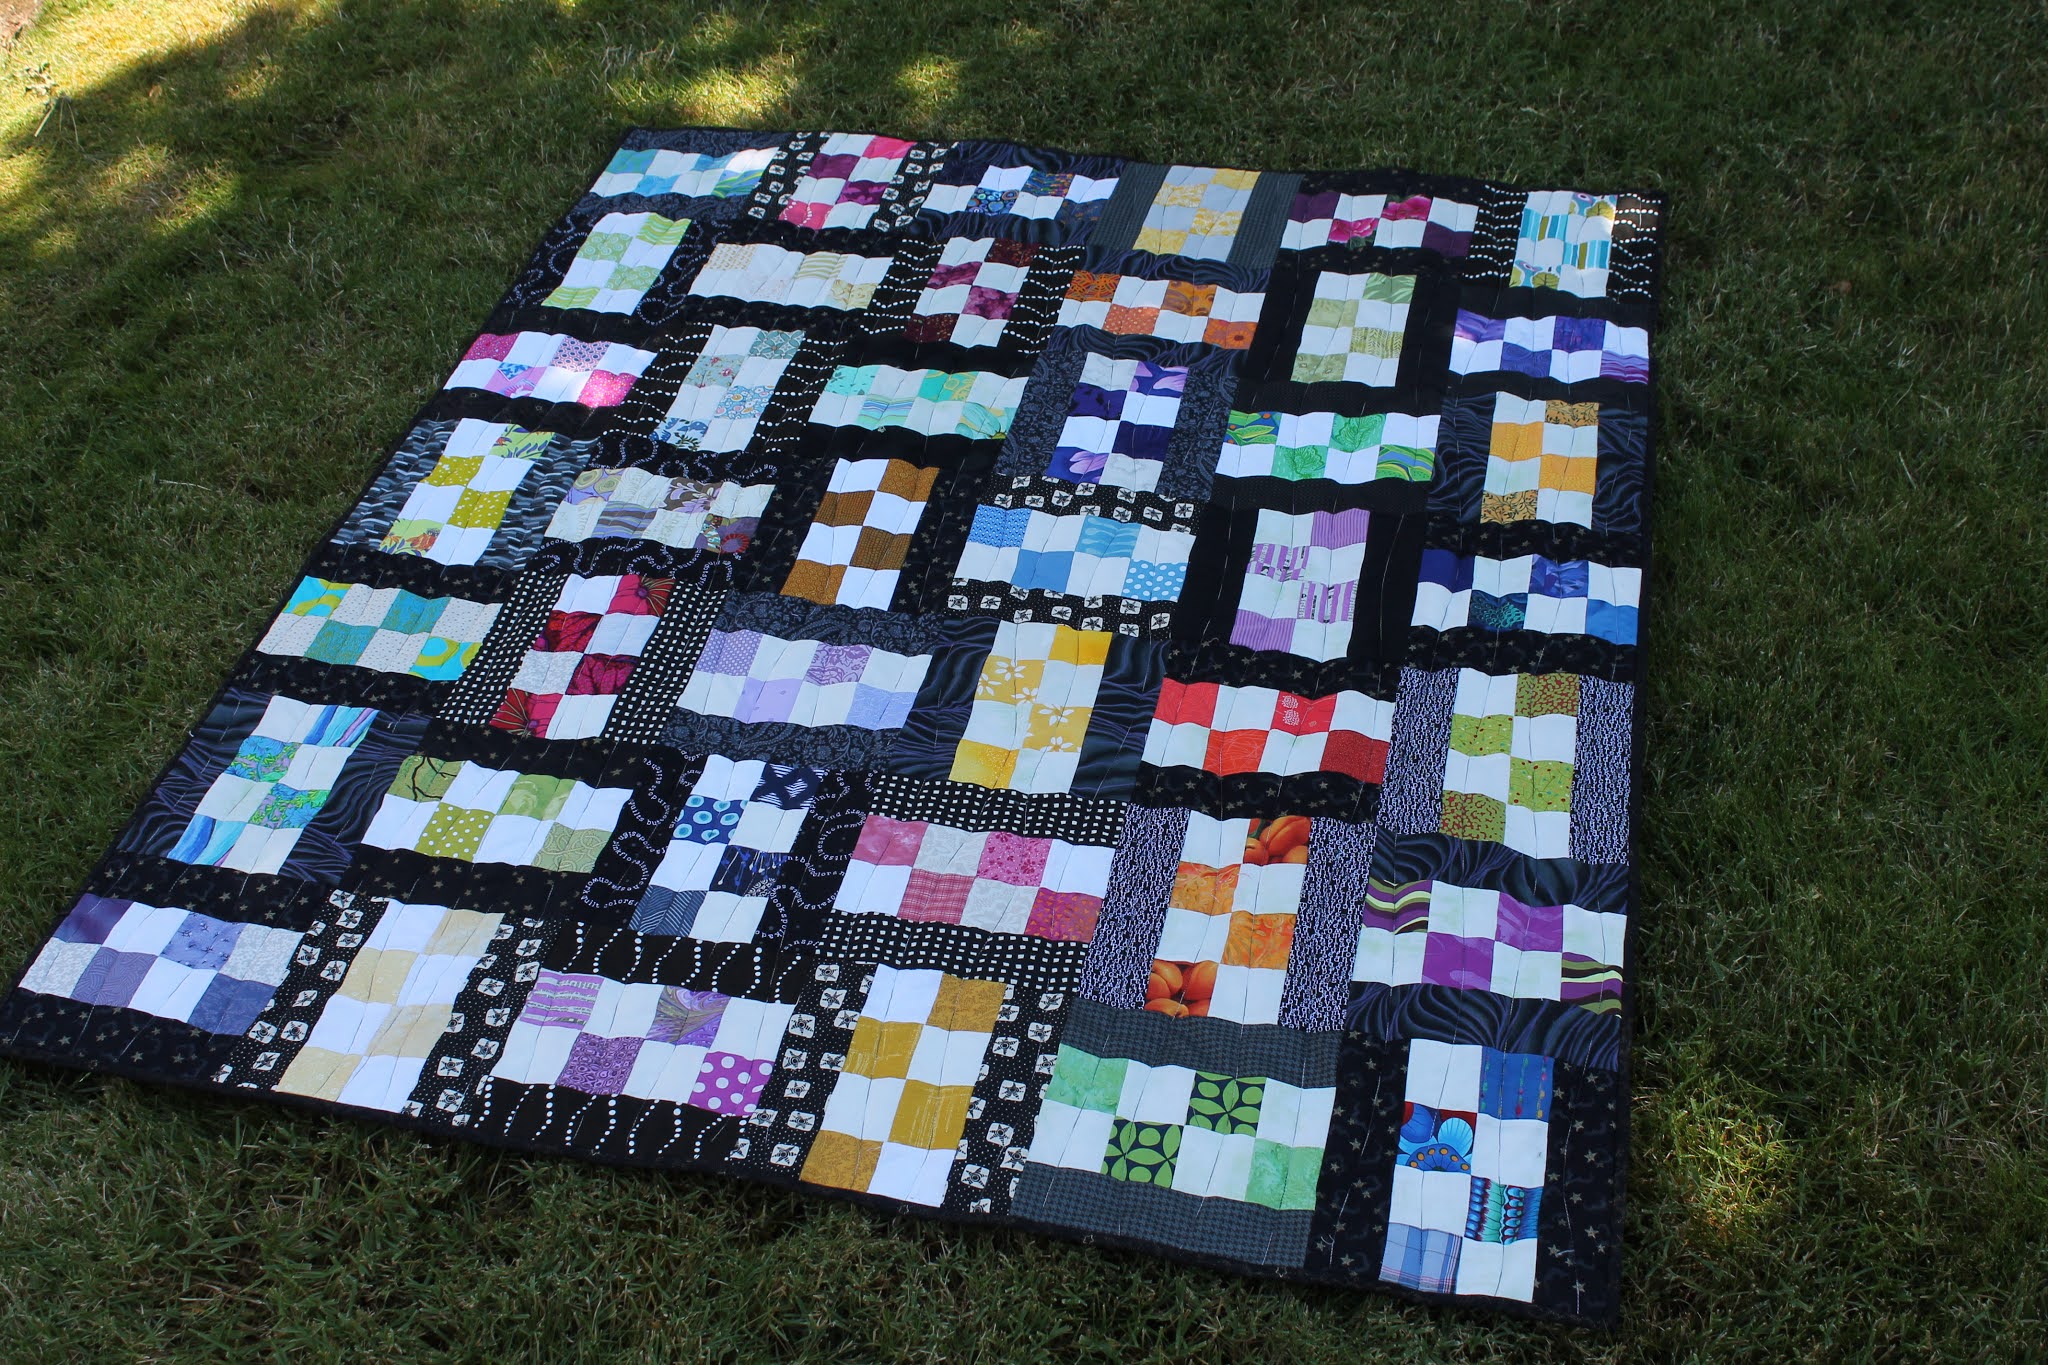 Here is an older quilt I made using the checkerboard design in rainbow colo...